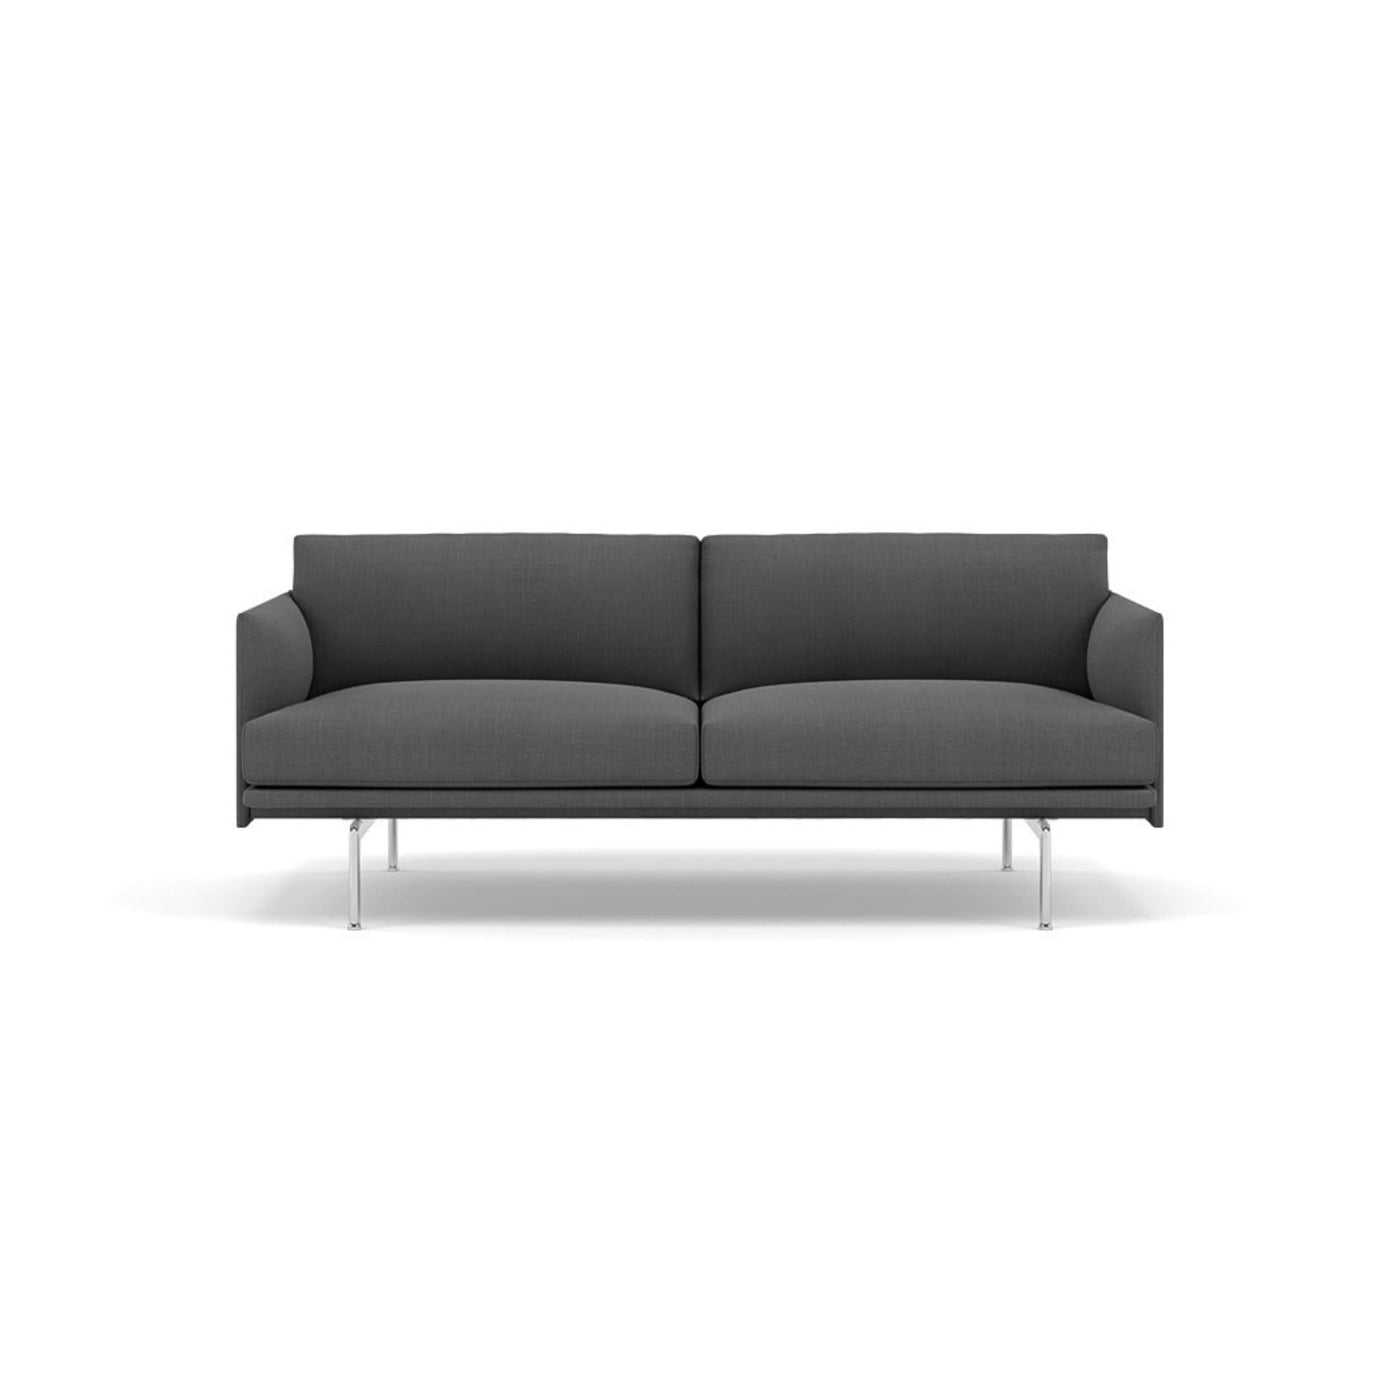 Muuto outline 2 seater sofa in remix 163 grey and polished aluminium legs. Made to order from someday designs. #colour_remix-163